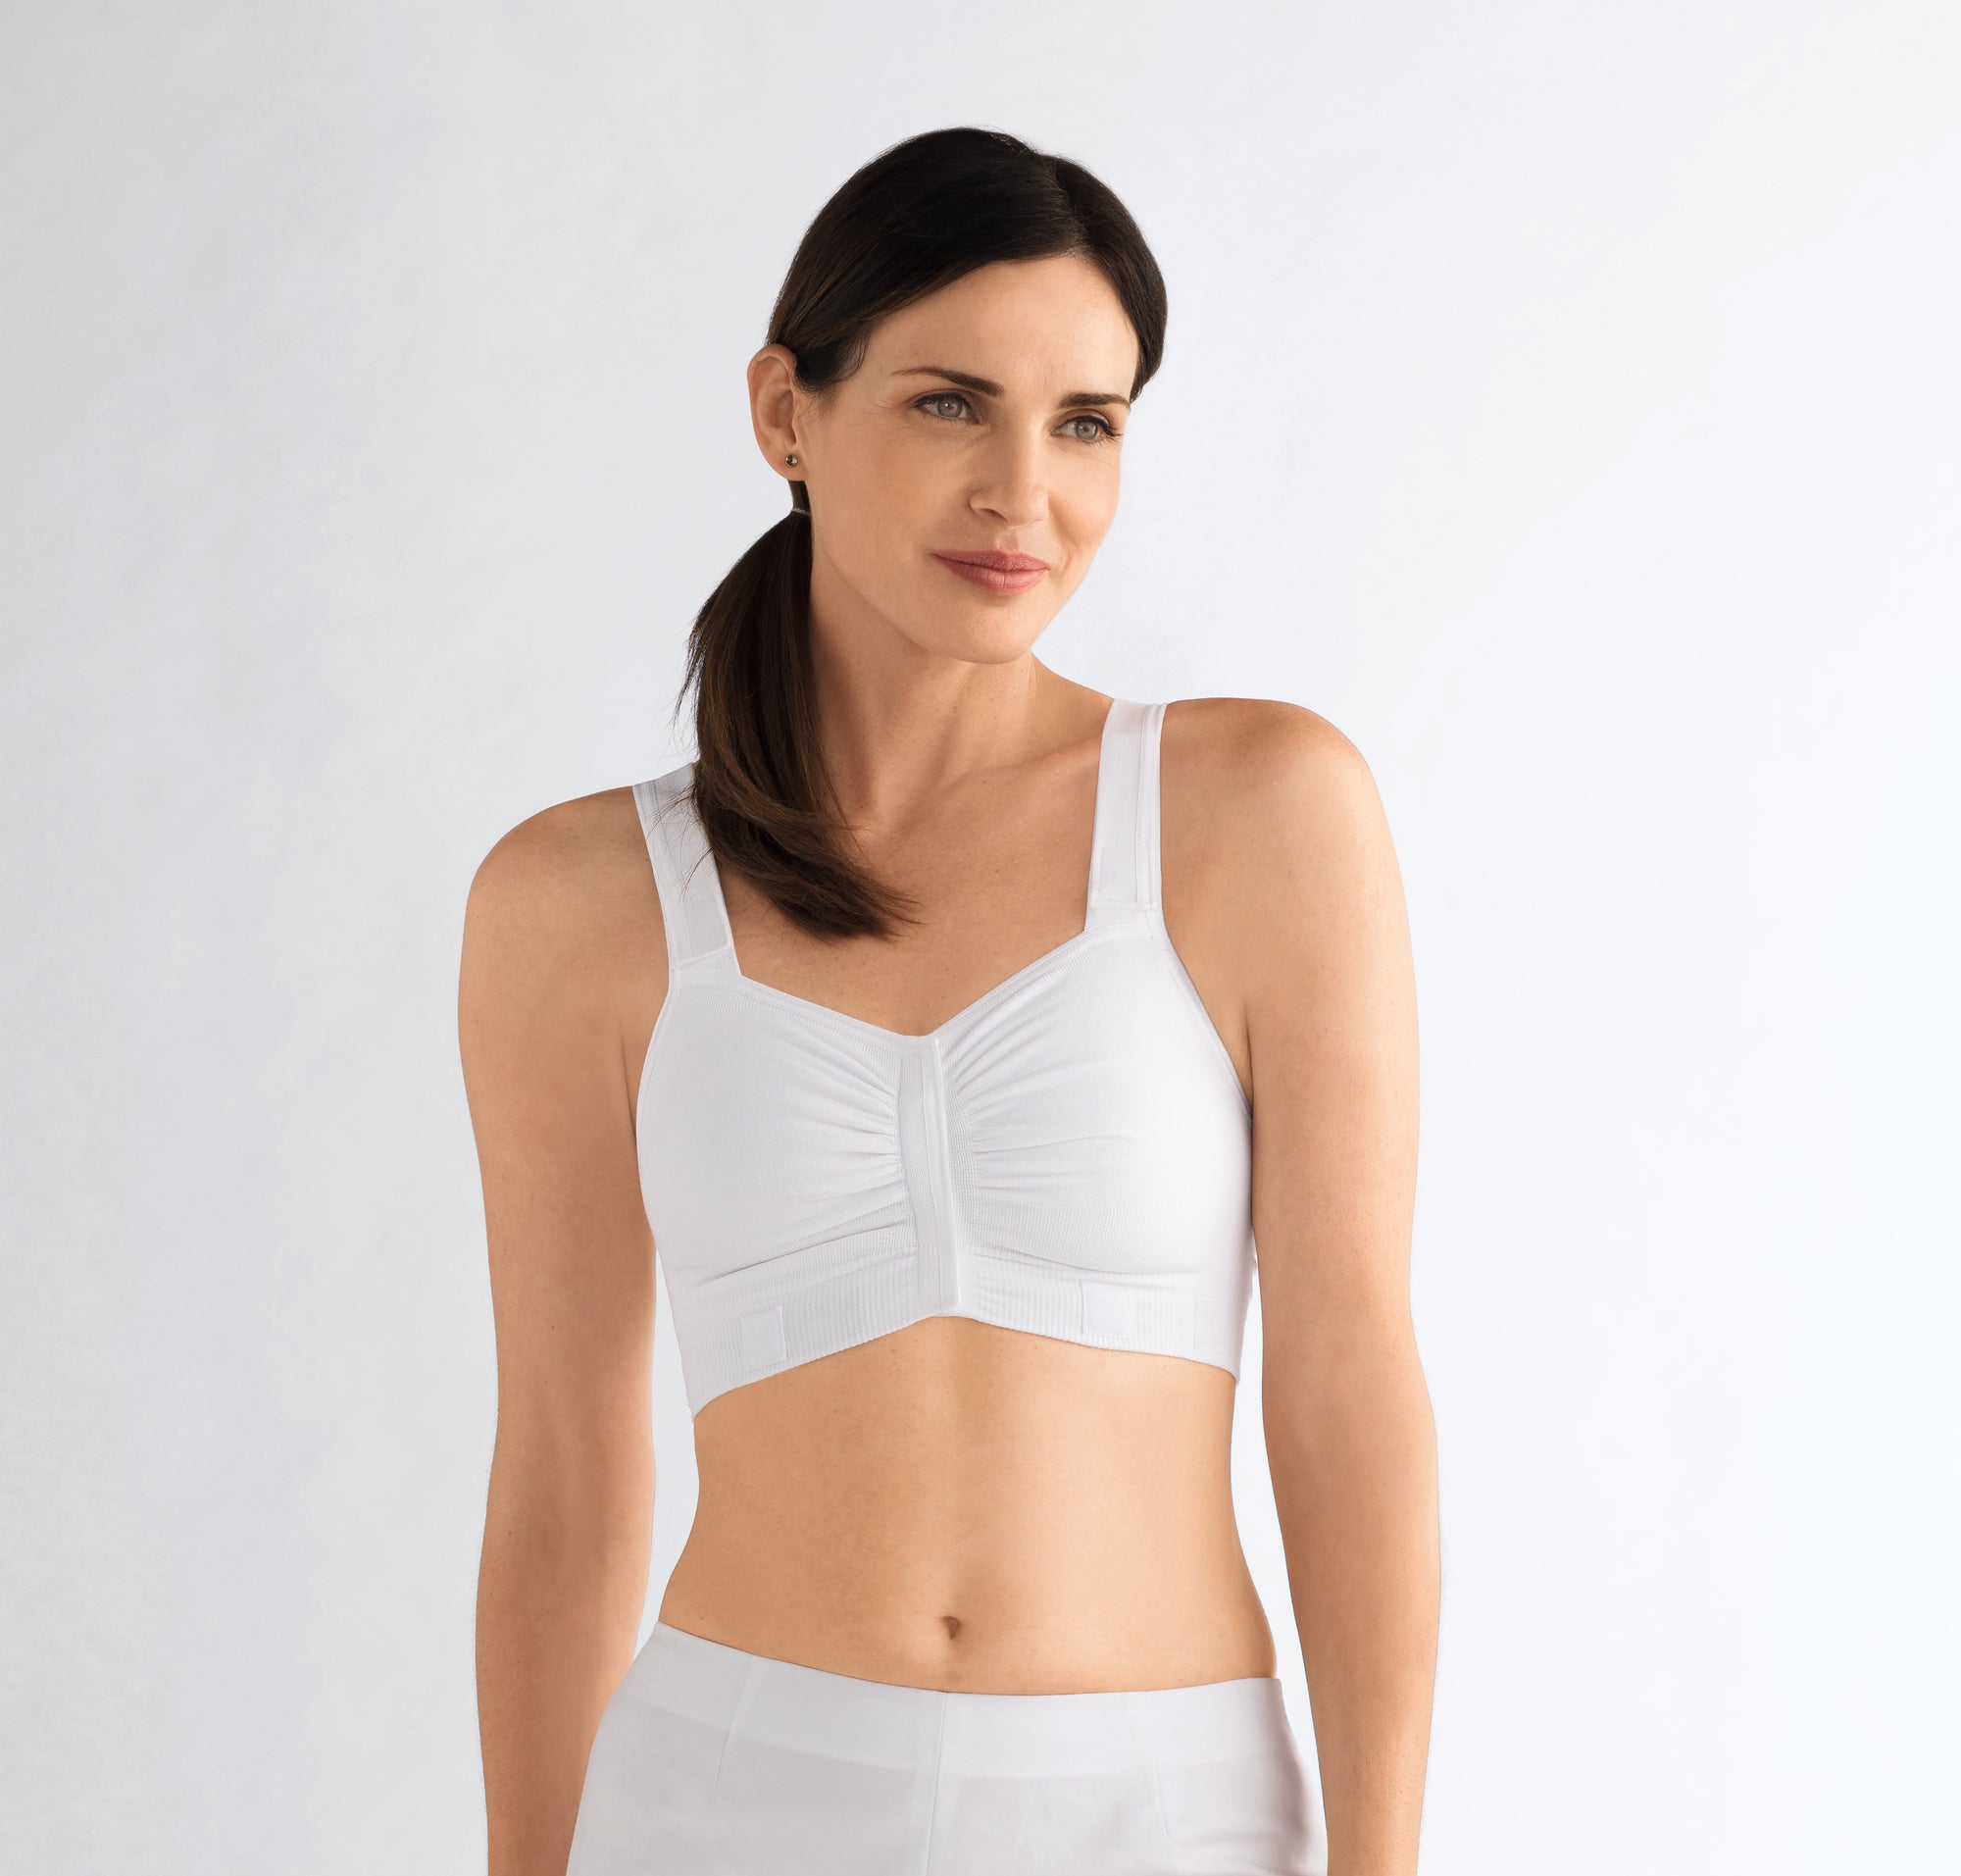 Breast Cancer Bras For Radiation Therapy or Sensitive Skin